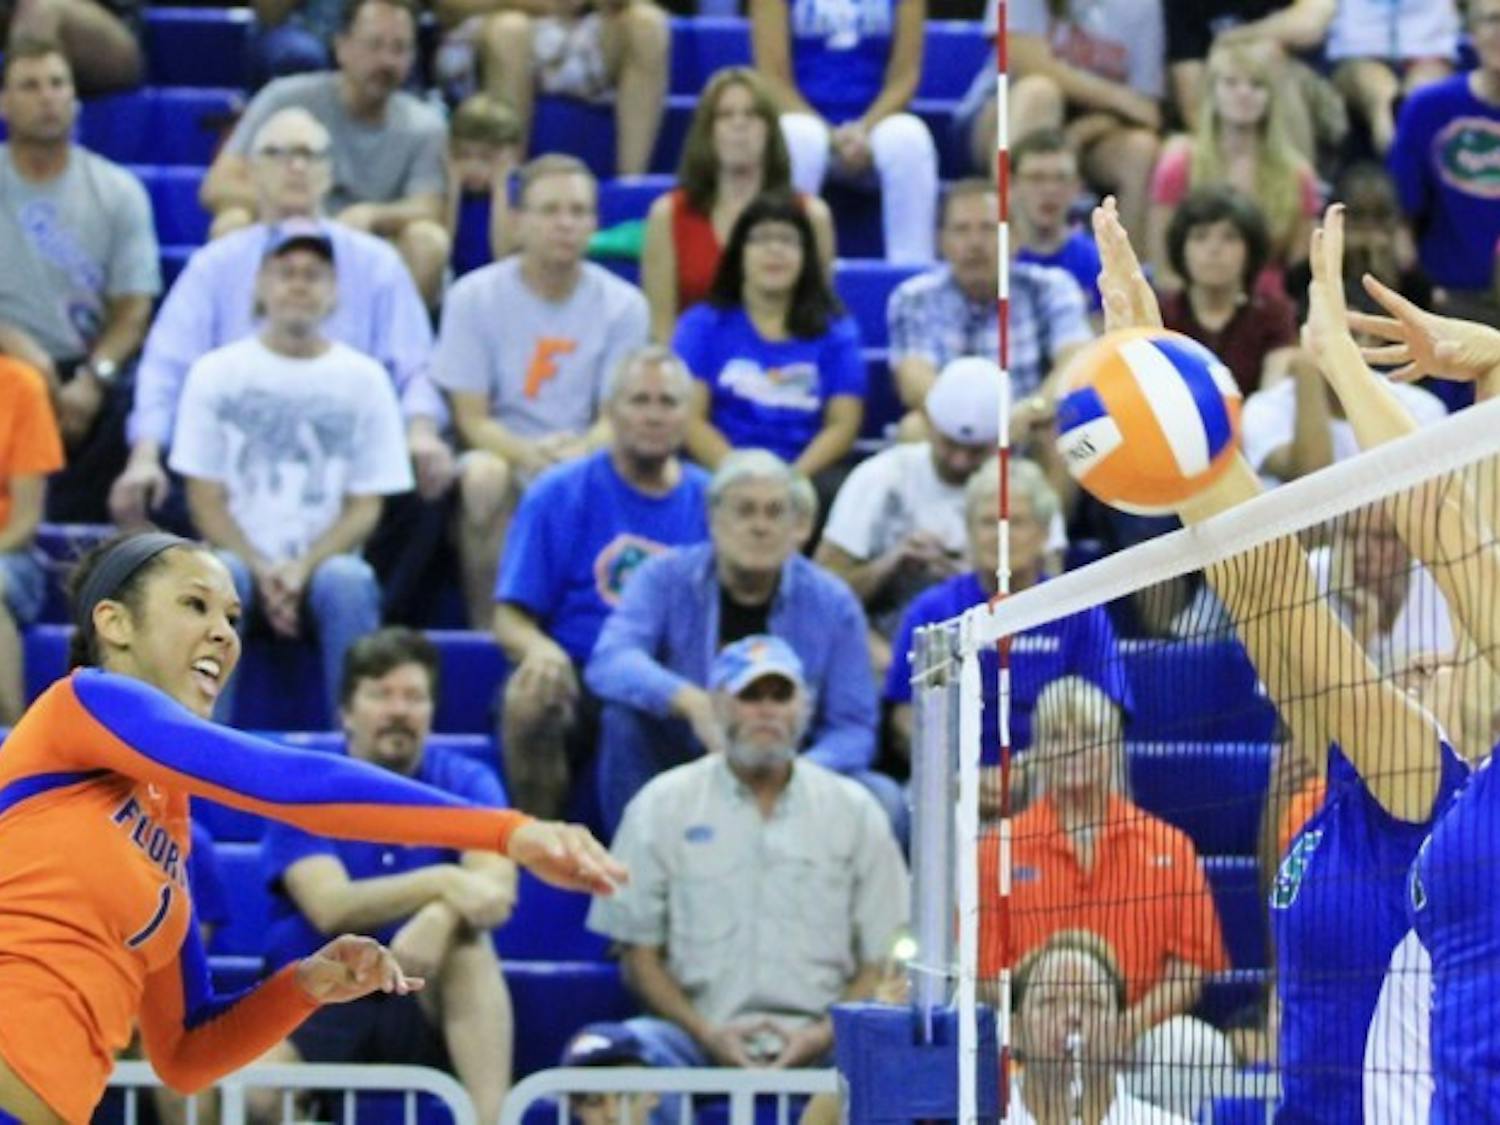 Freshman Berkley Whaley (1) spike the ball over the net during Florida's match against Florida Gulf Coast at the Stephen C. O'Connell Center on Aug. 25.